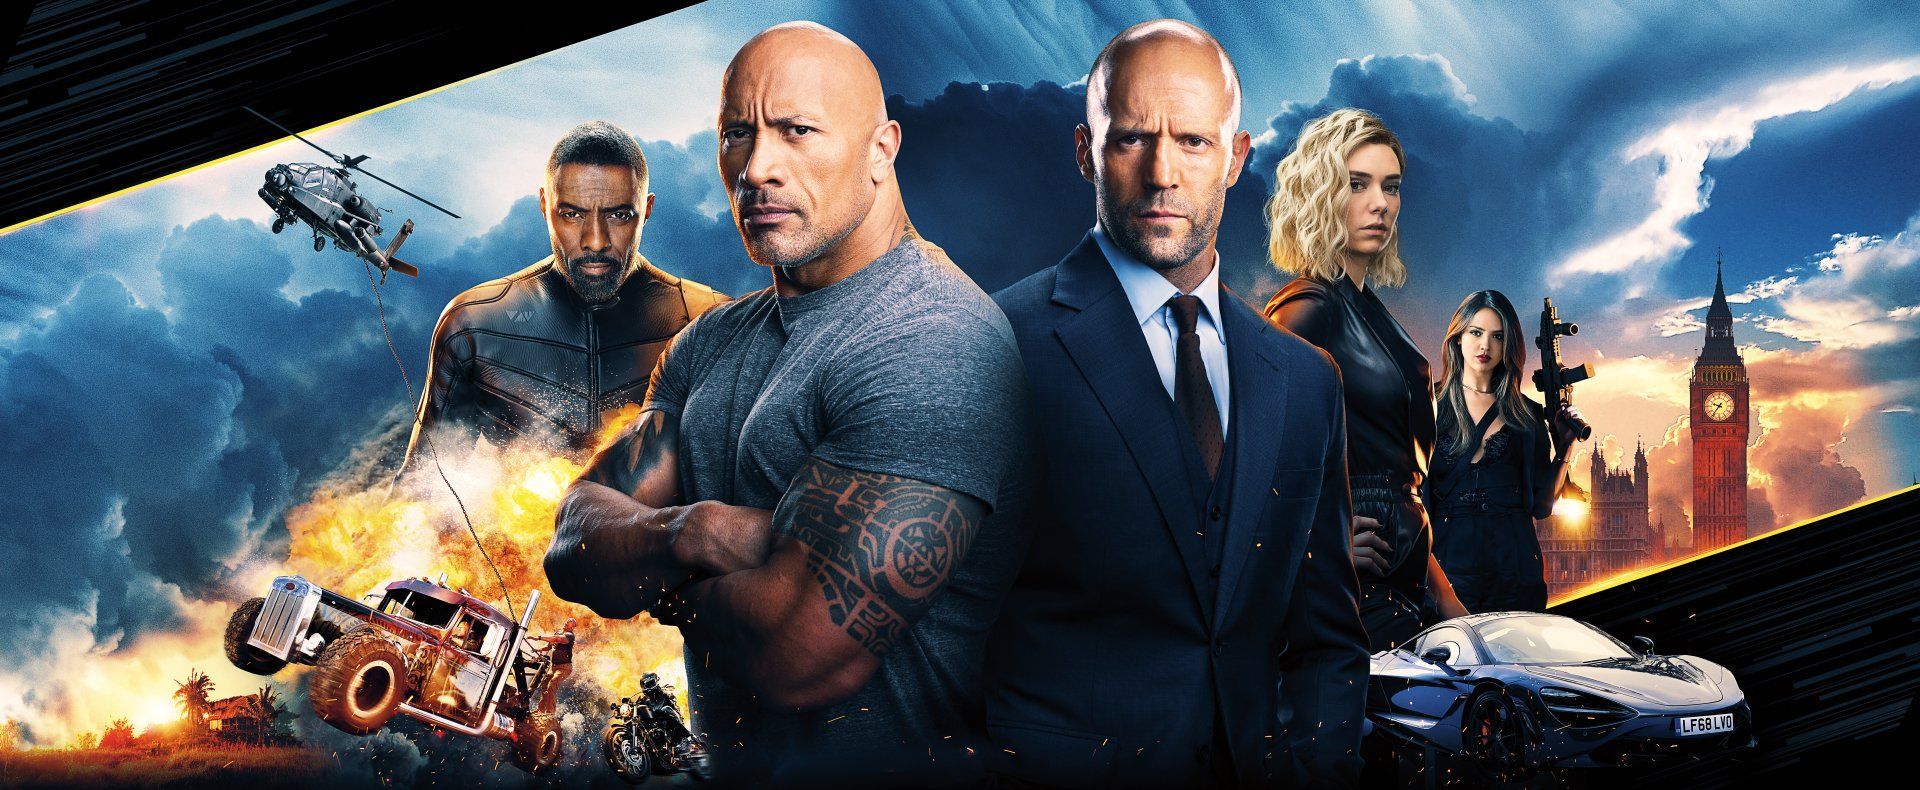 2 fast 2 furious hobbs and shaw download film free